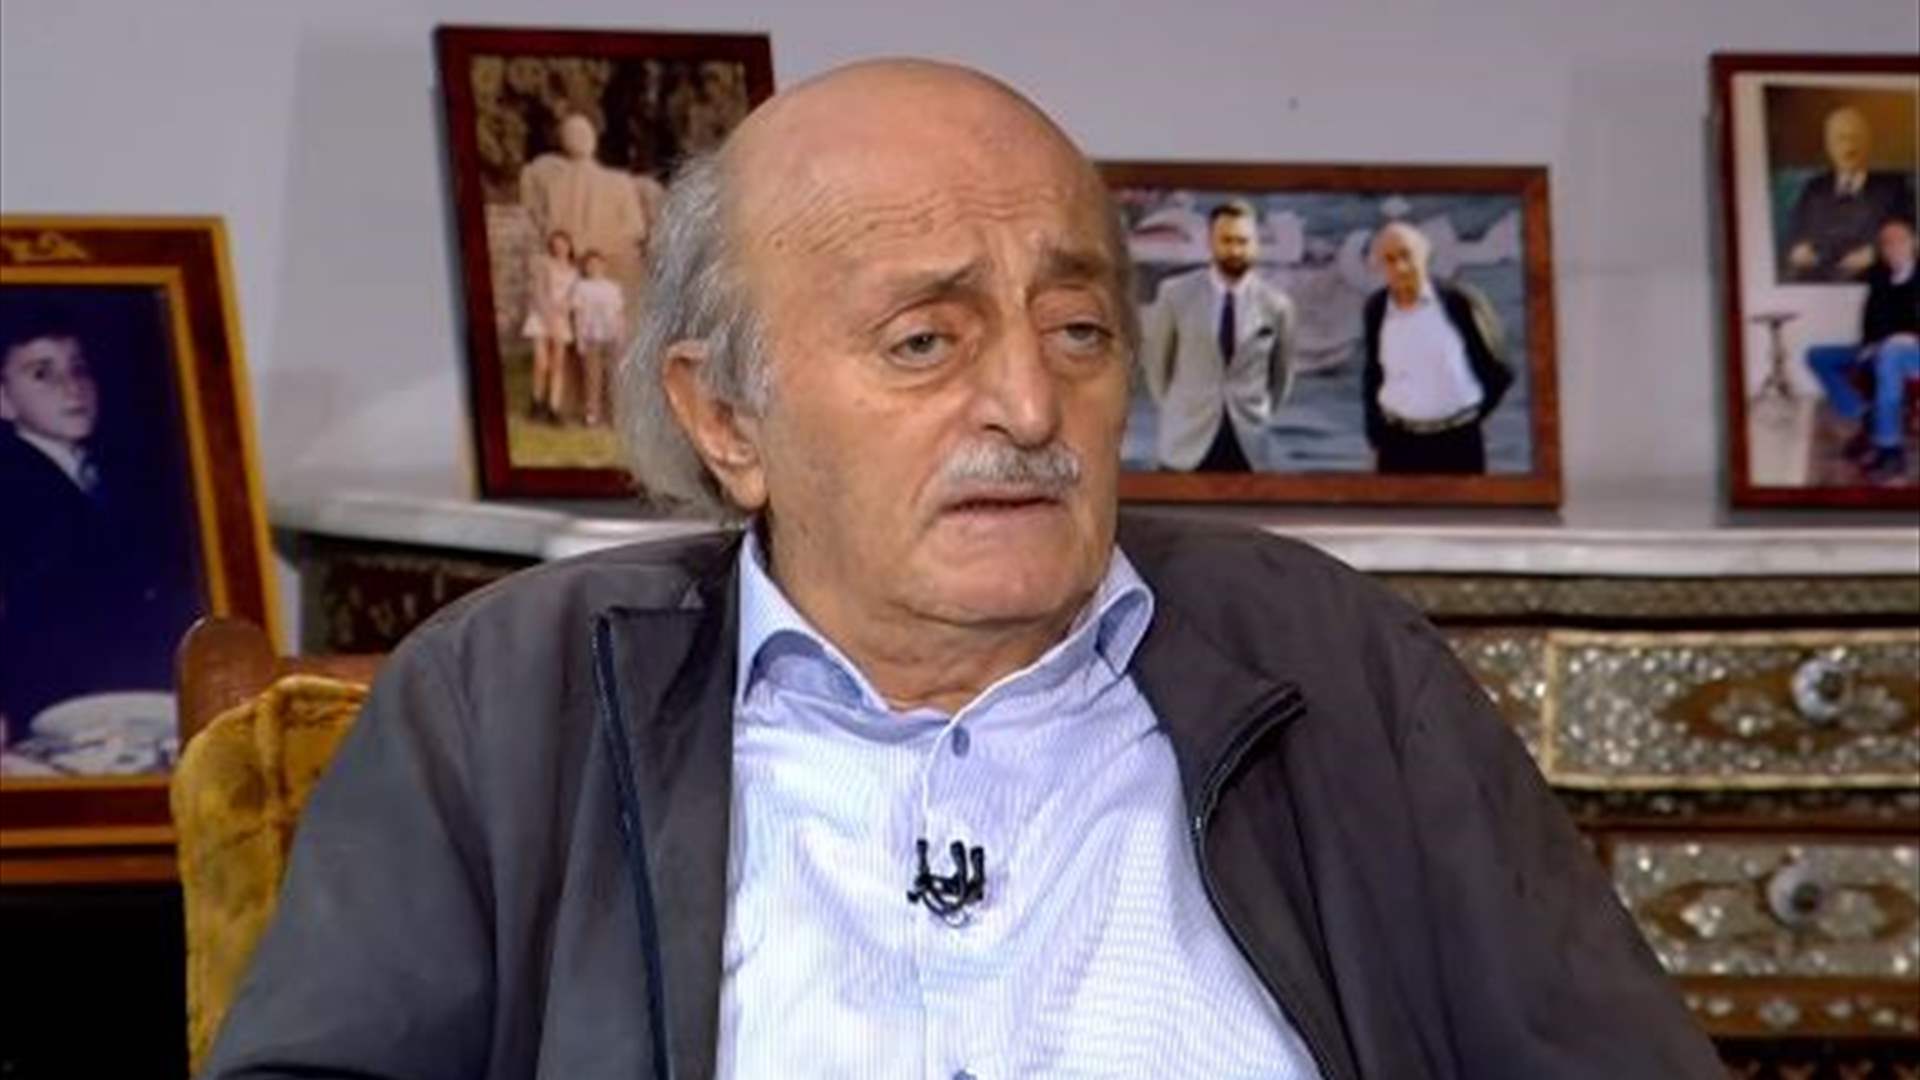 Walid Jumblatt expresses concerns about dragging Lebanon into war with hopes of avoiding it